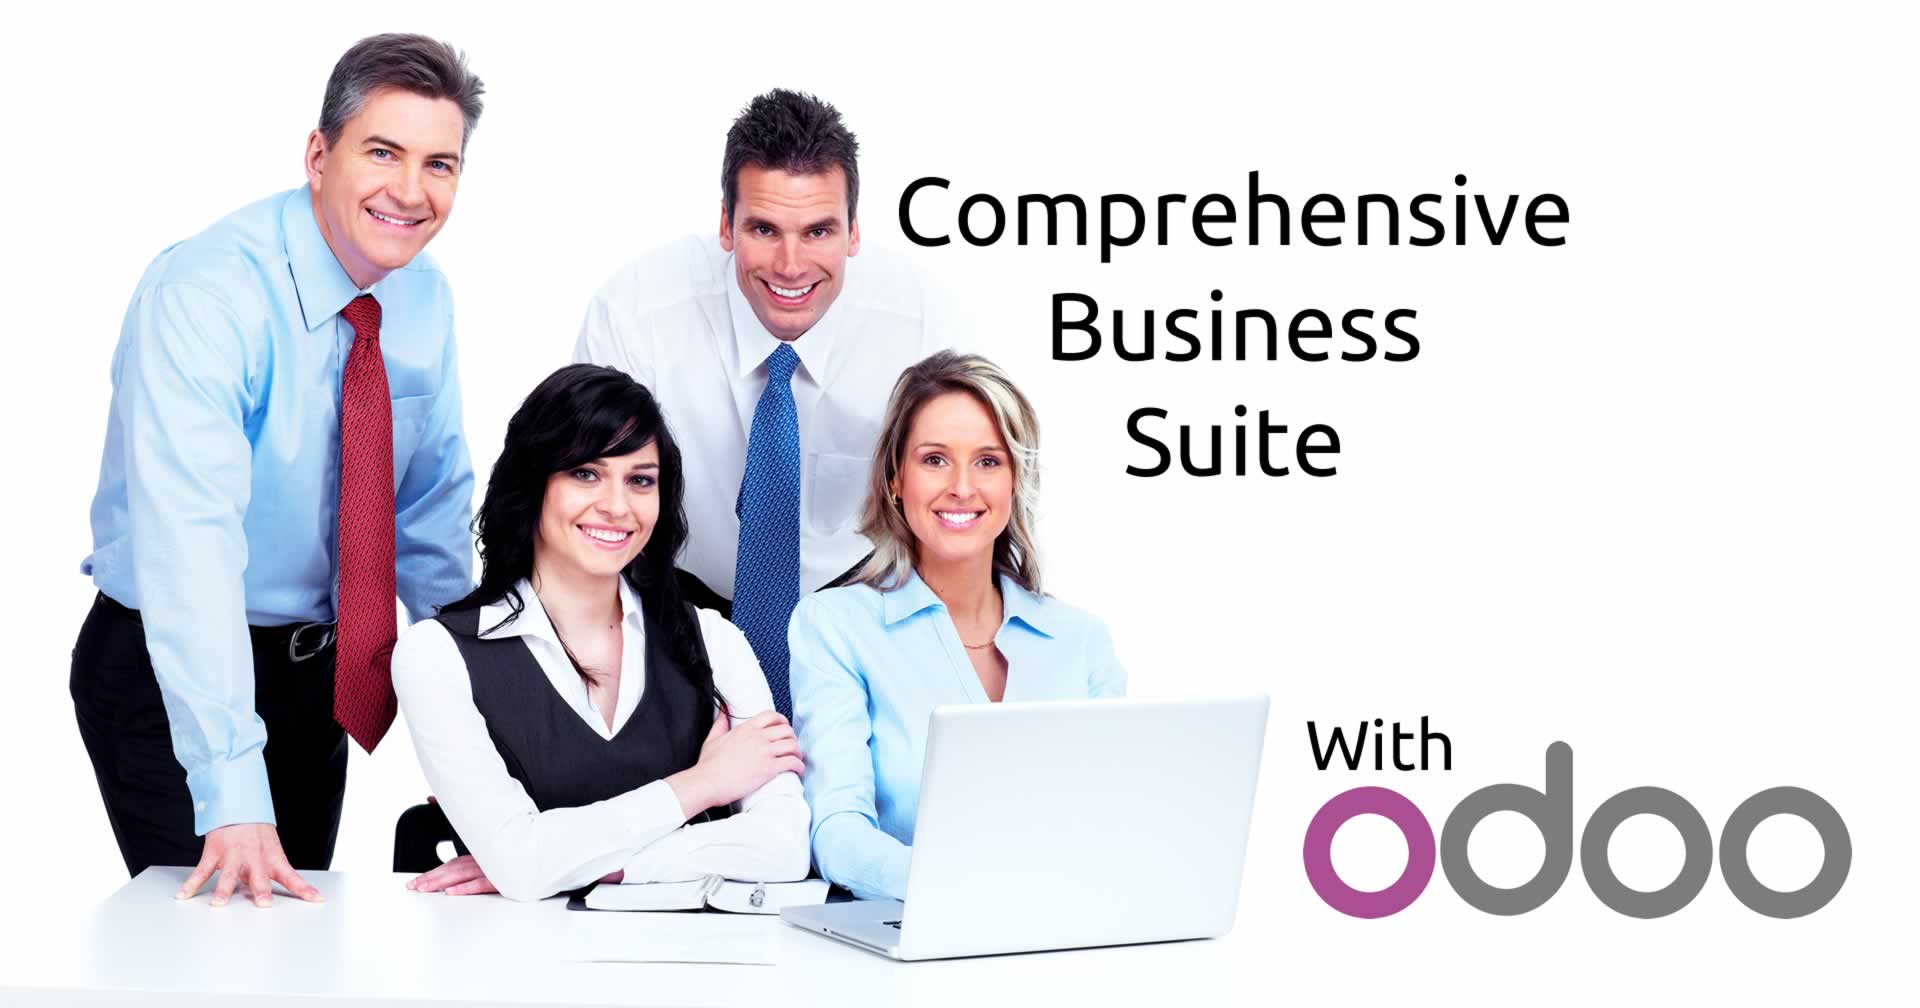 Build yourself a Comprehensive Business Suite with Odoo